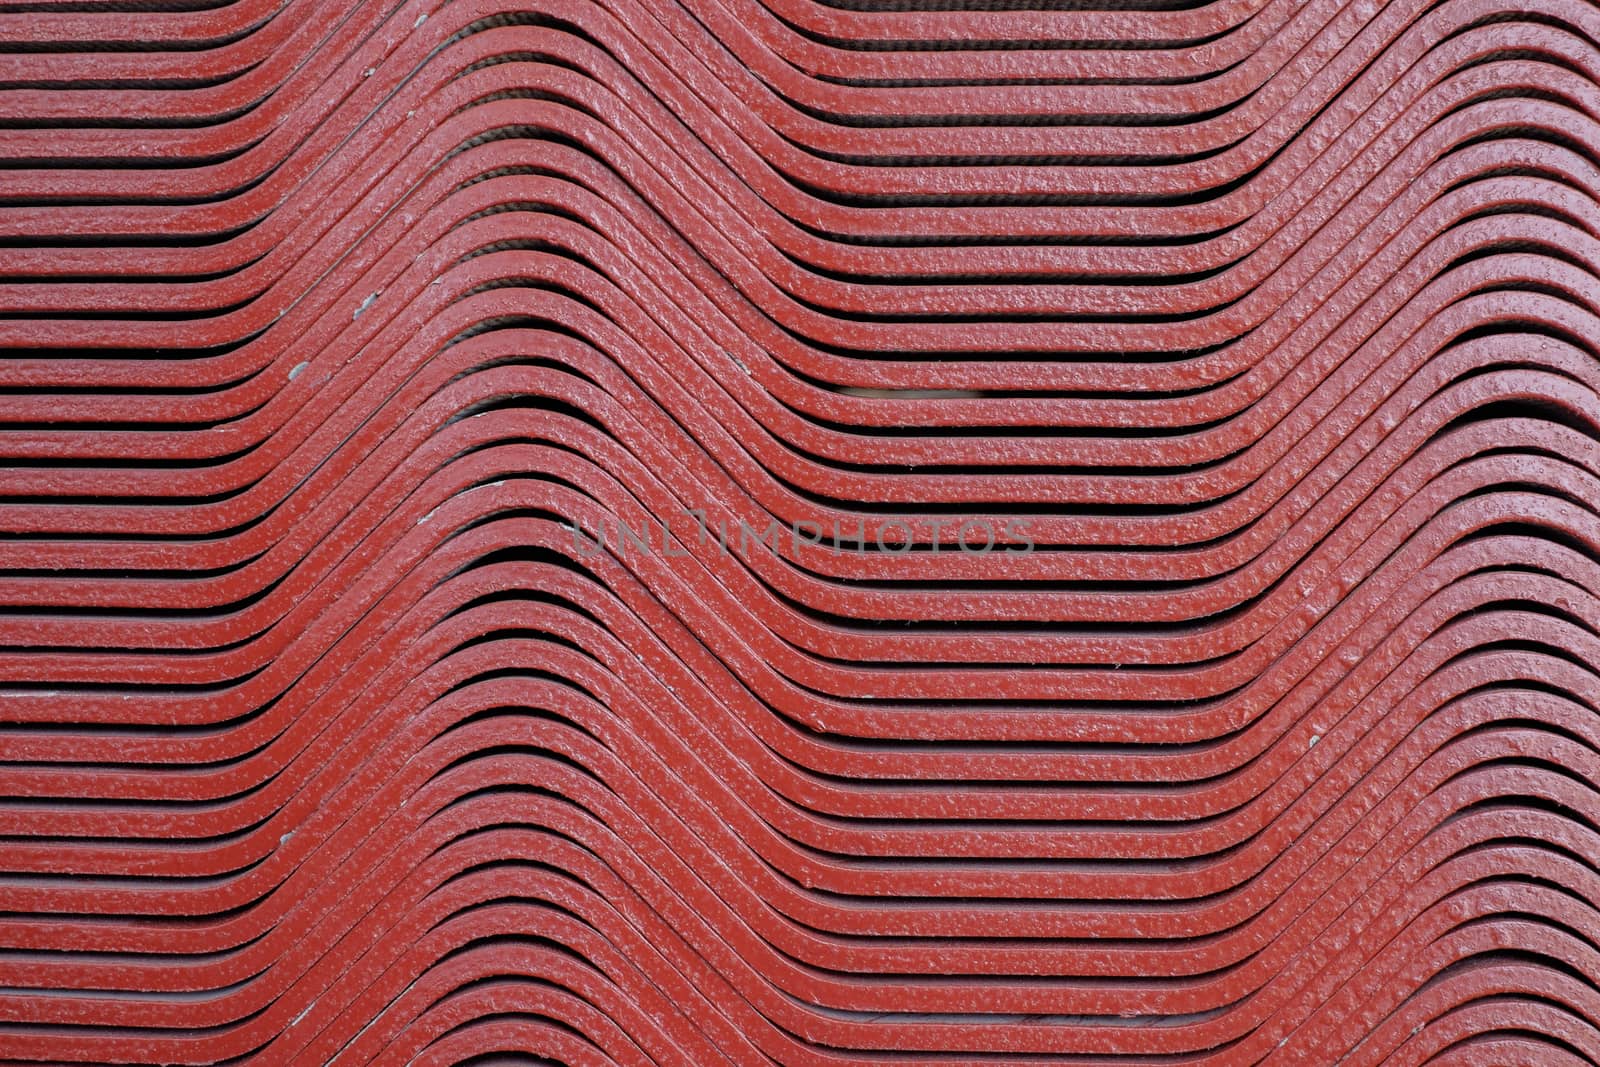 red roof tiles arrange by zneb076